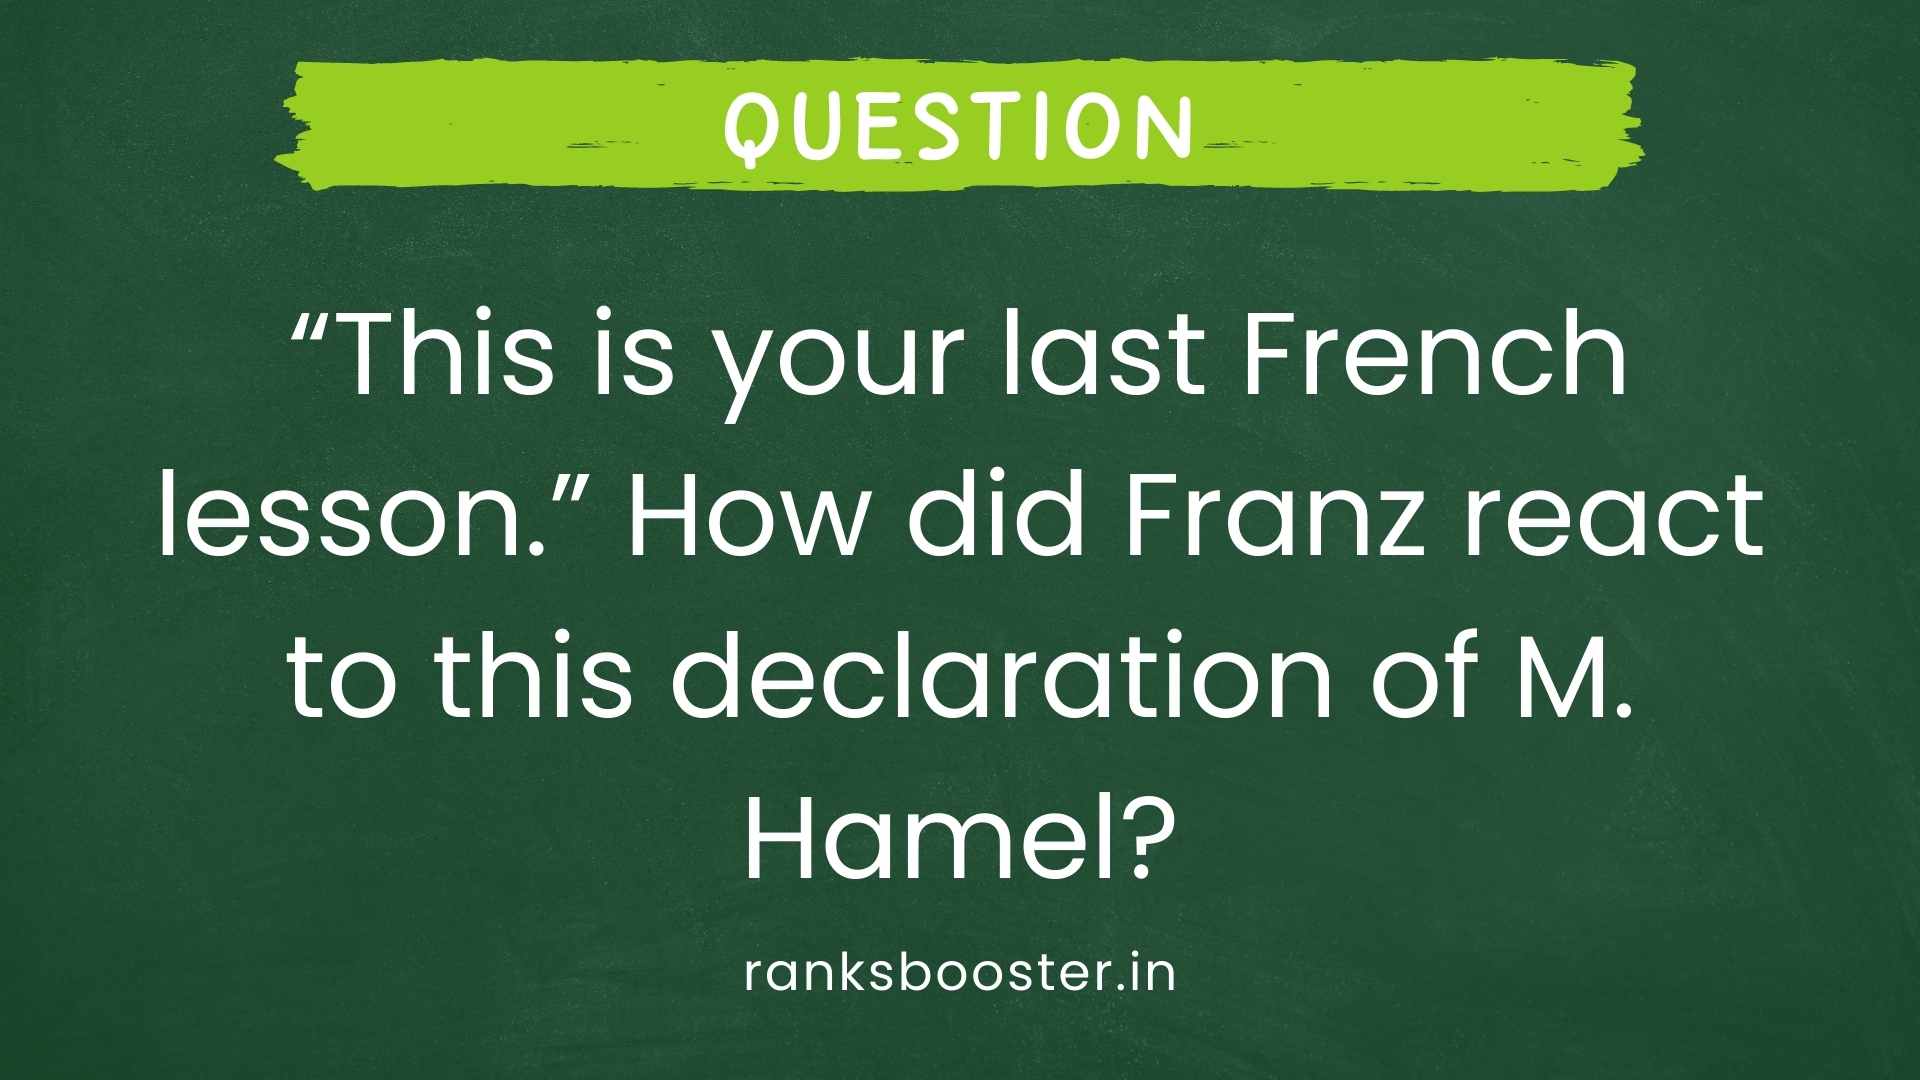 Question: “This is your last French lesson.” How did Franz react to this declaration of M. Hamel? [CBSE Delhi 2010]